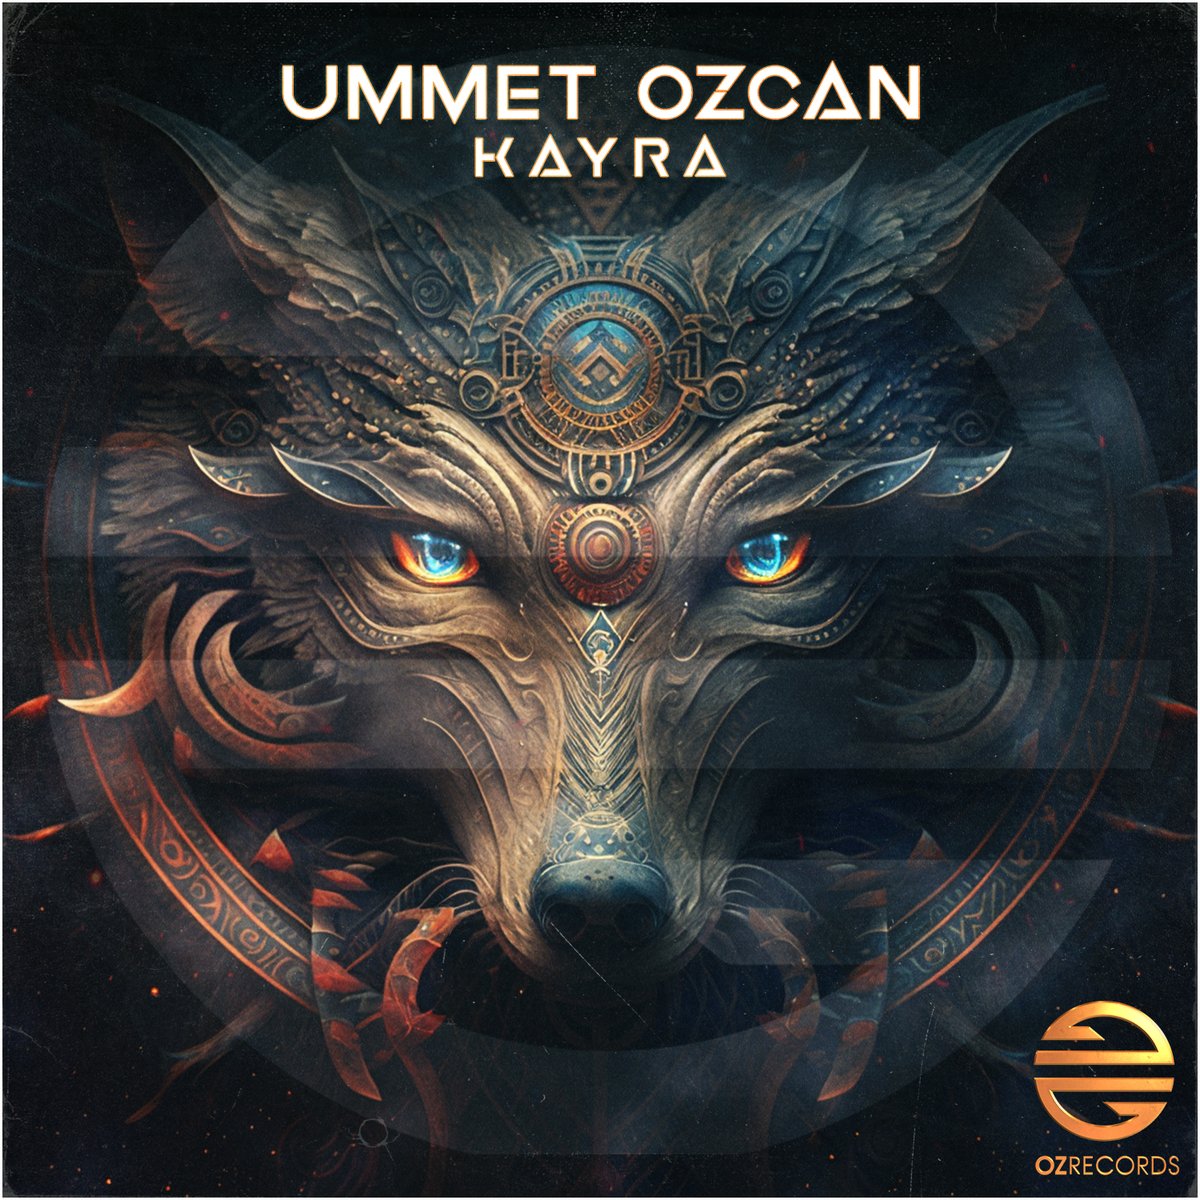 Another fire release by @UmmetOzcan lands today 🔥 'Kayra' is out now everywhere: ozrecords.release.link/kayra